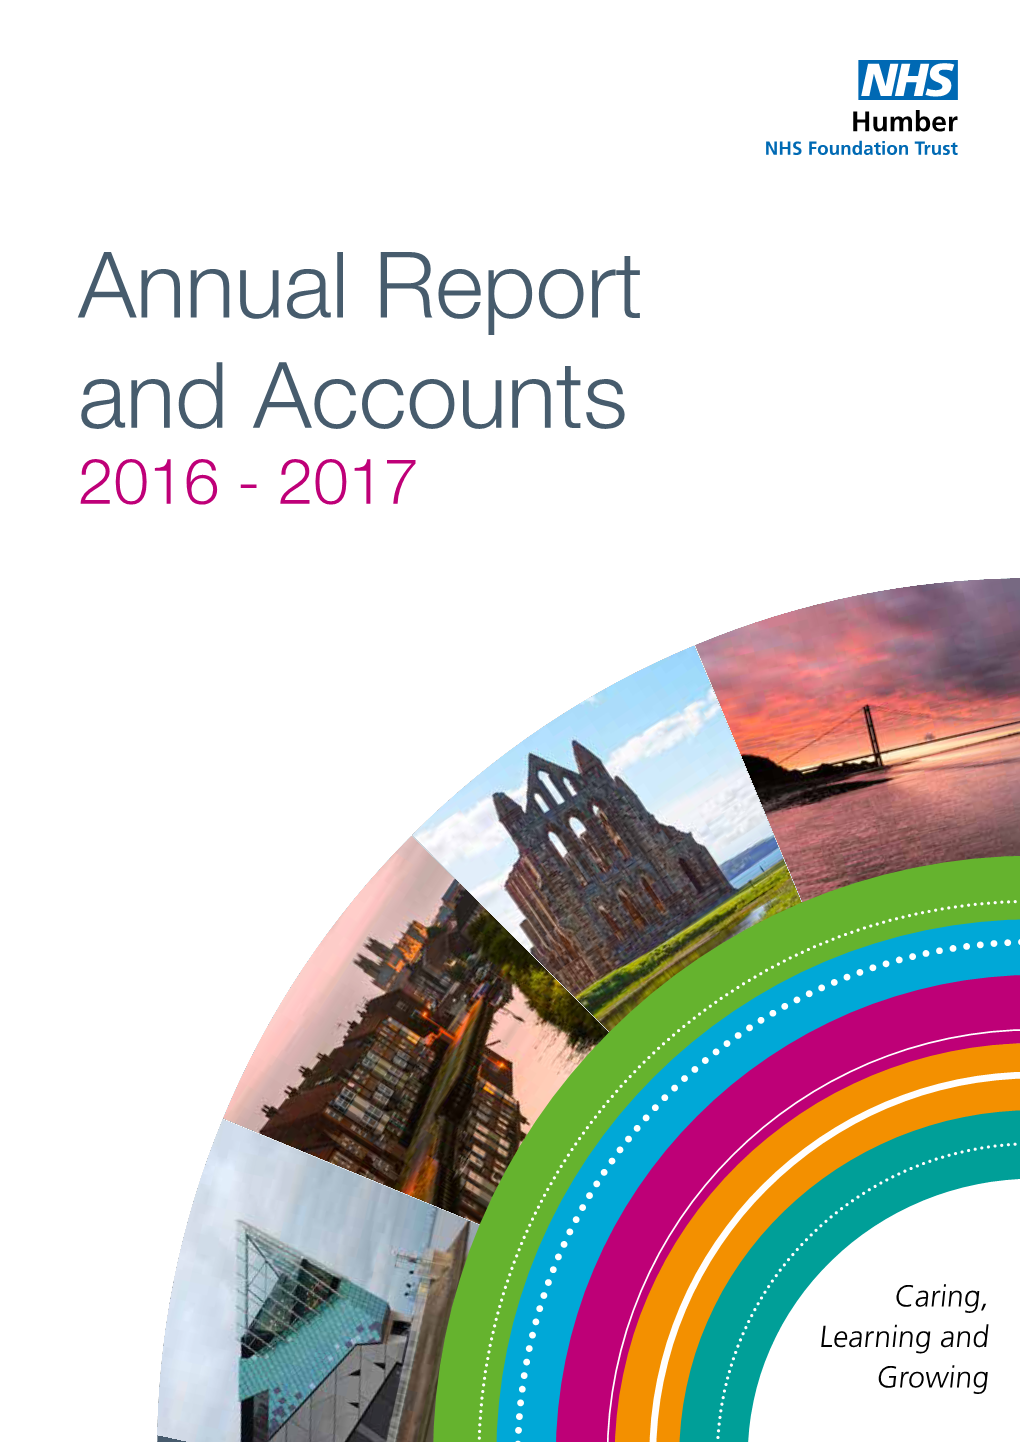 Annual Report and Accounts 2016-17